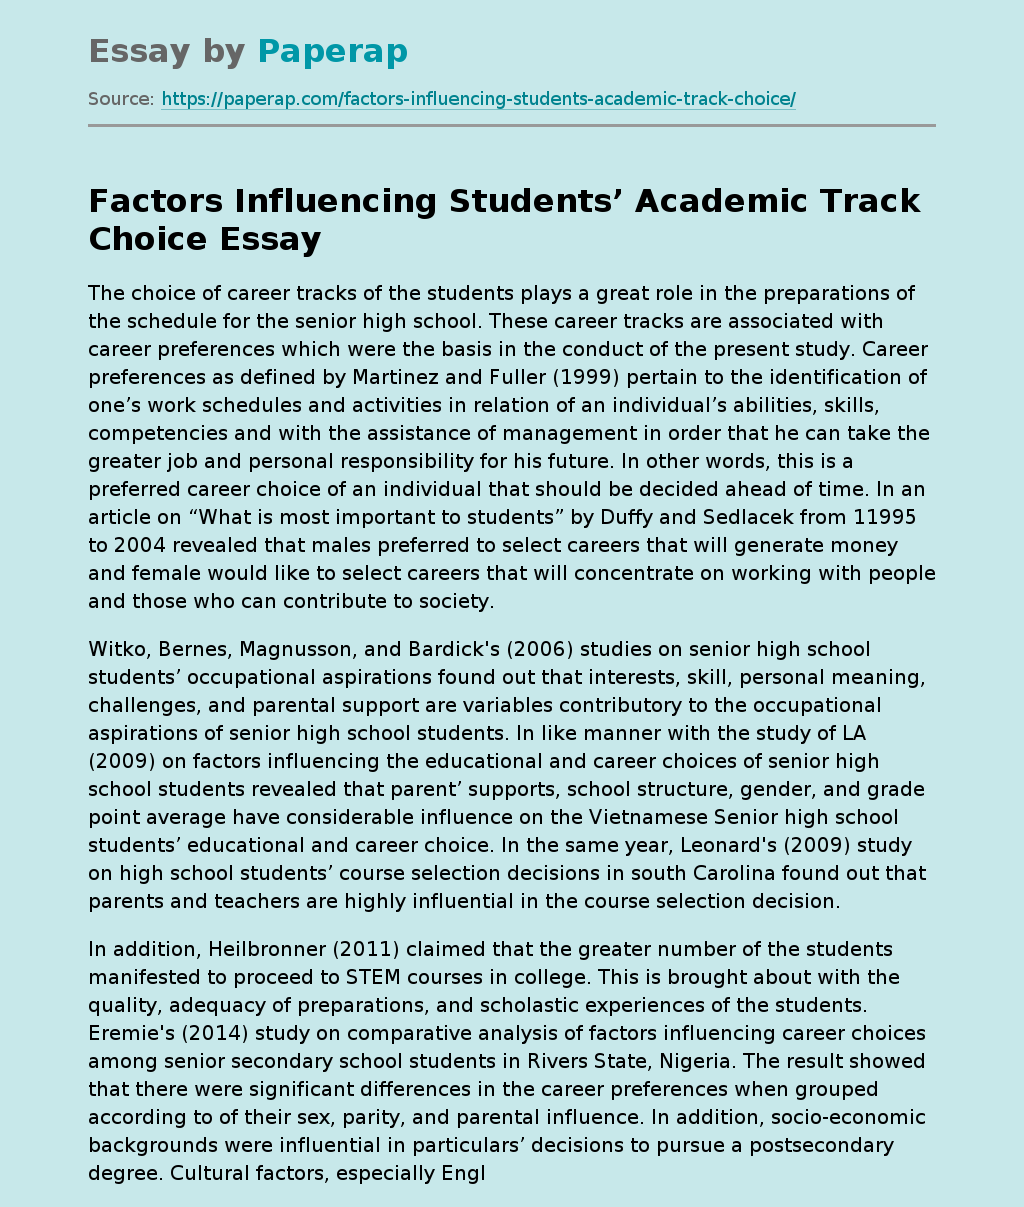 Factors Influencing Students’ Academic Track Choice